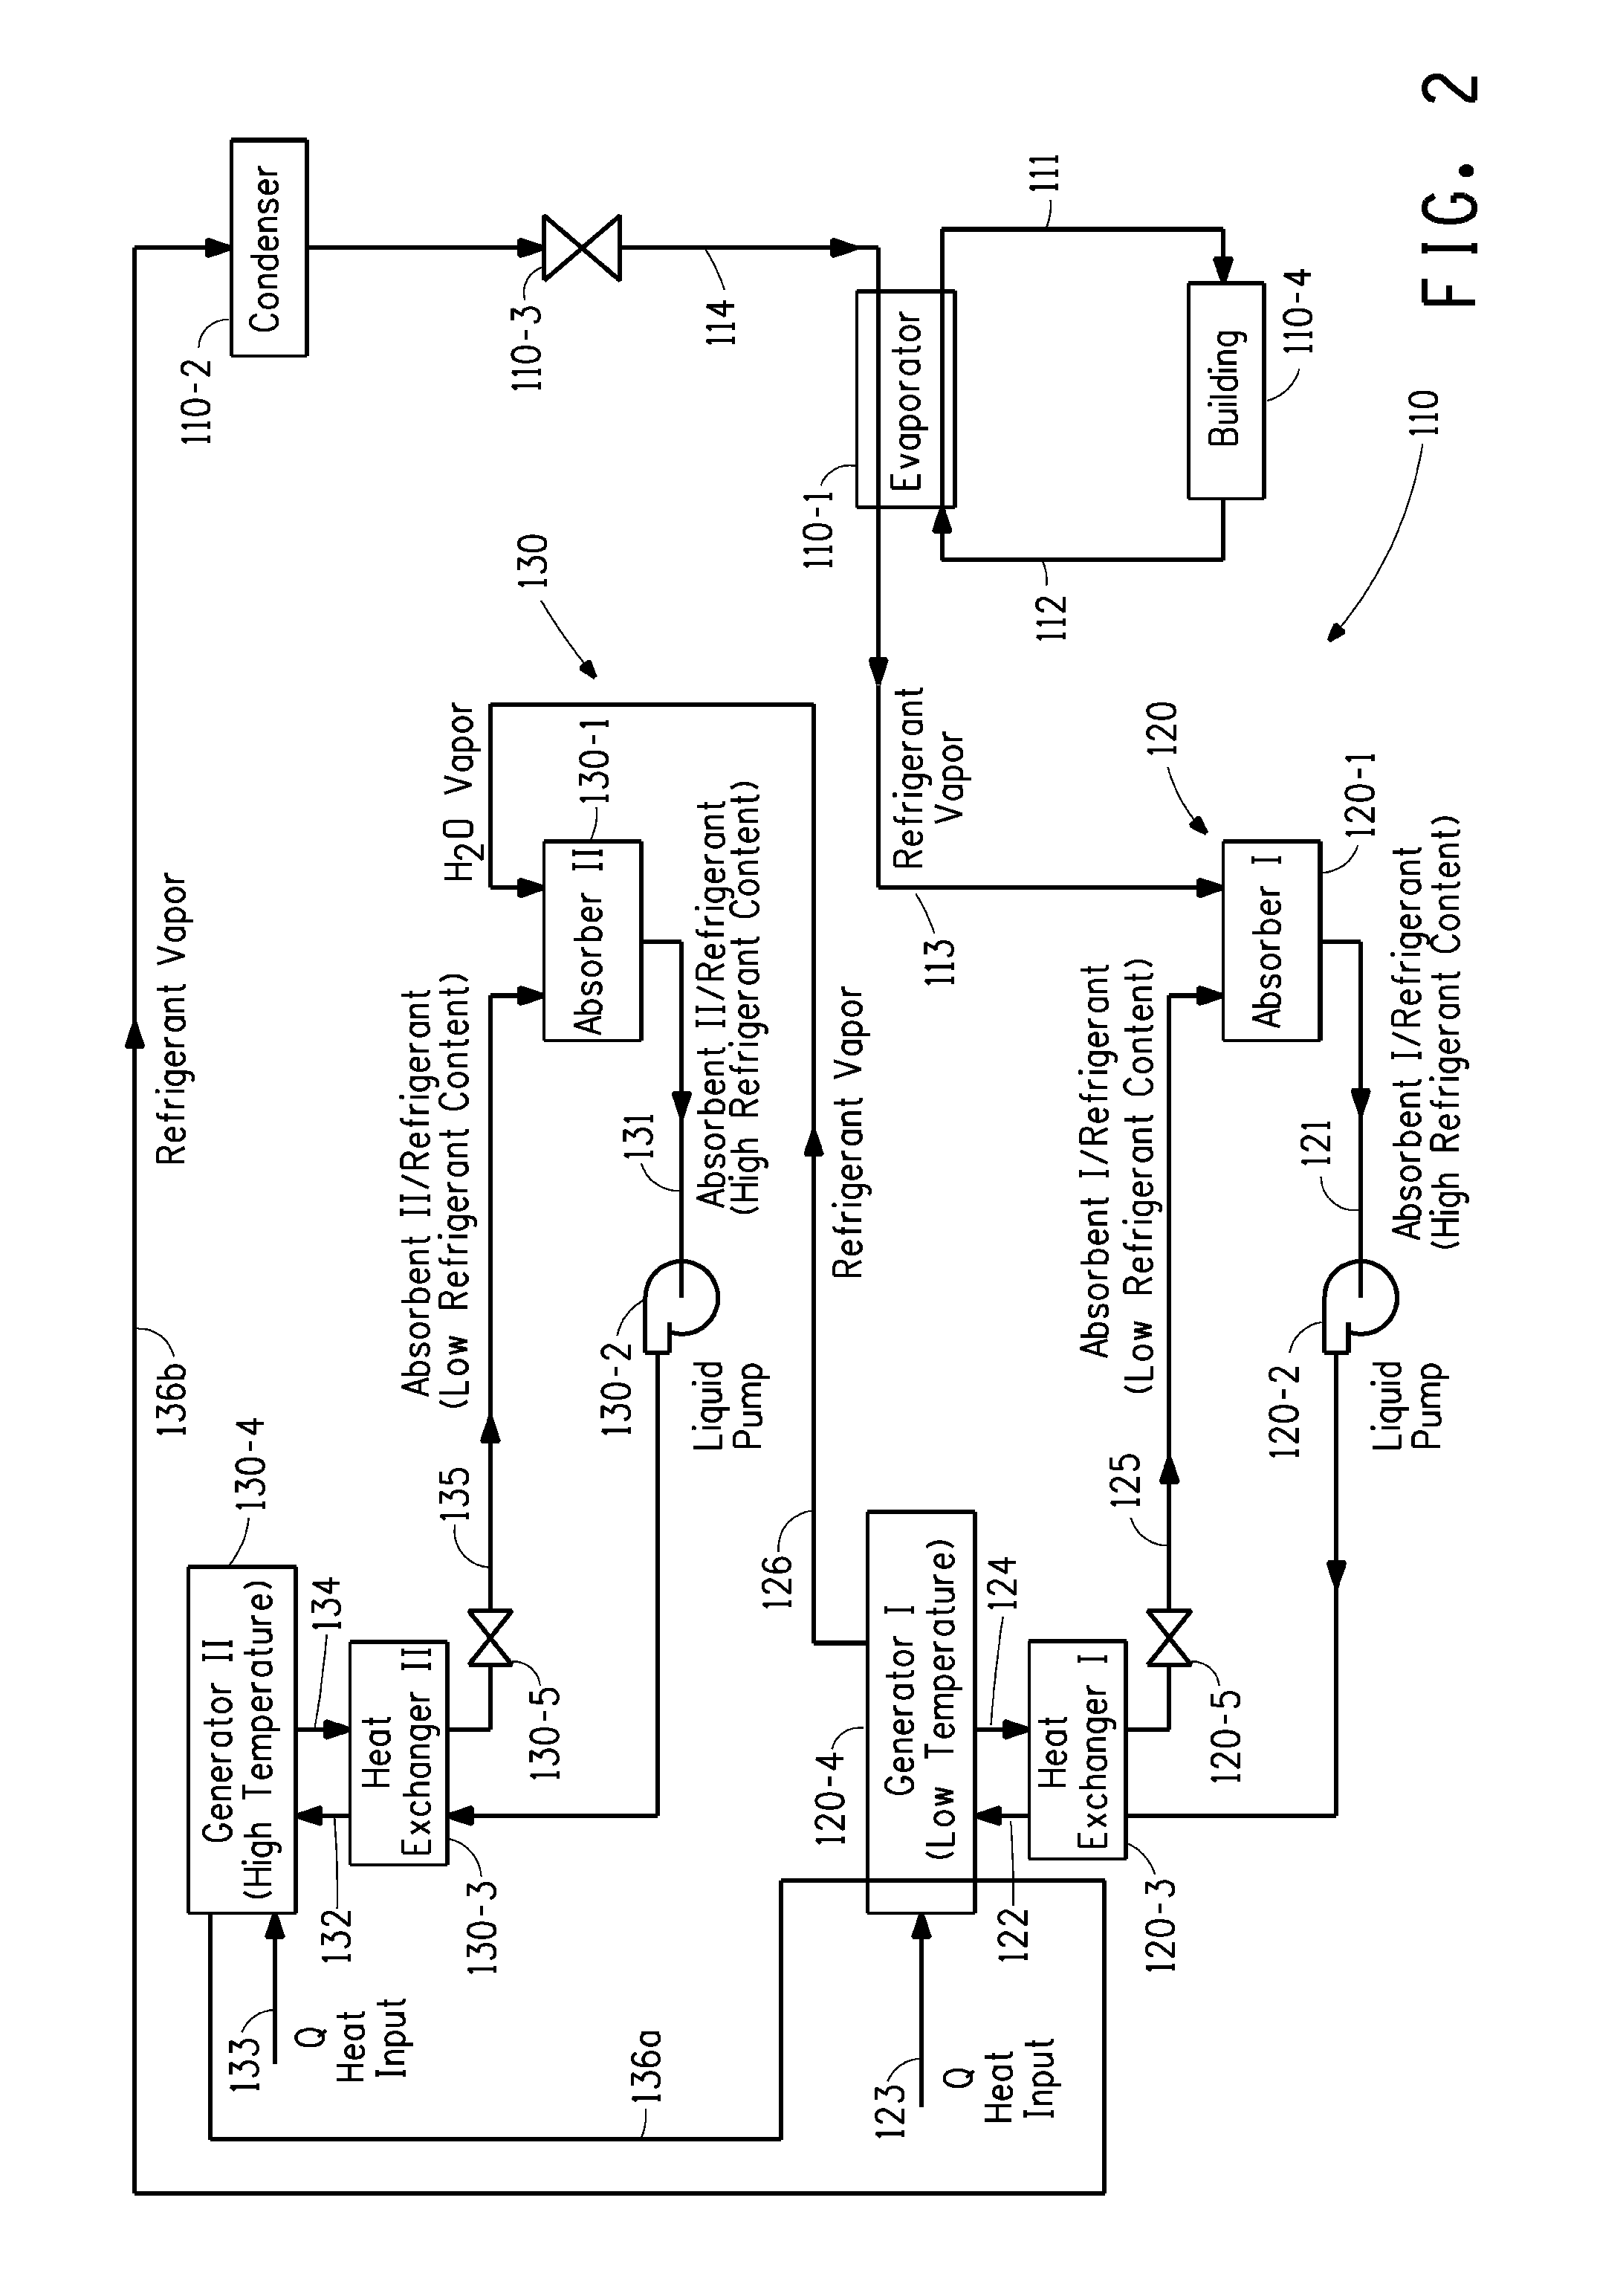 Absorption cycle system having dual absorption circuits